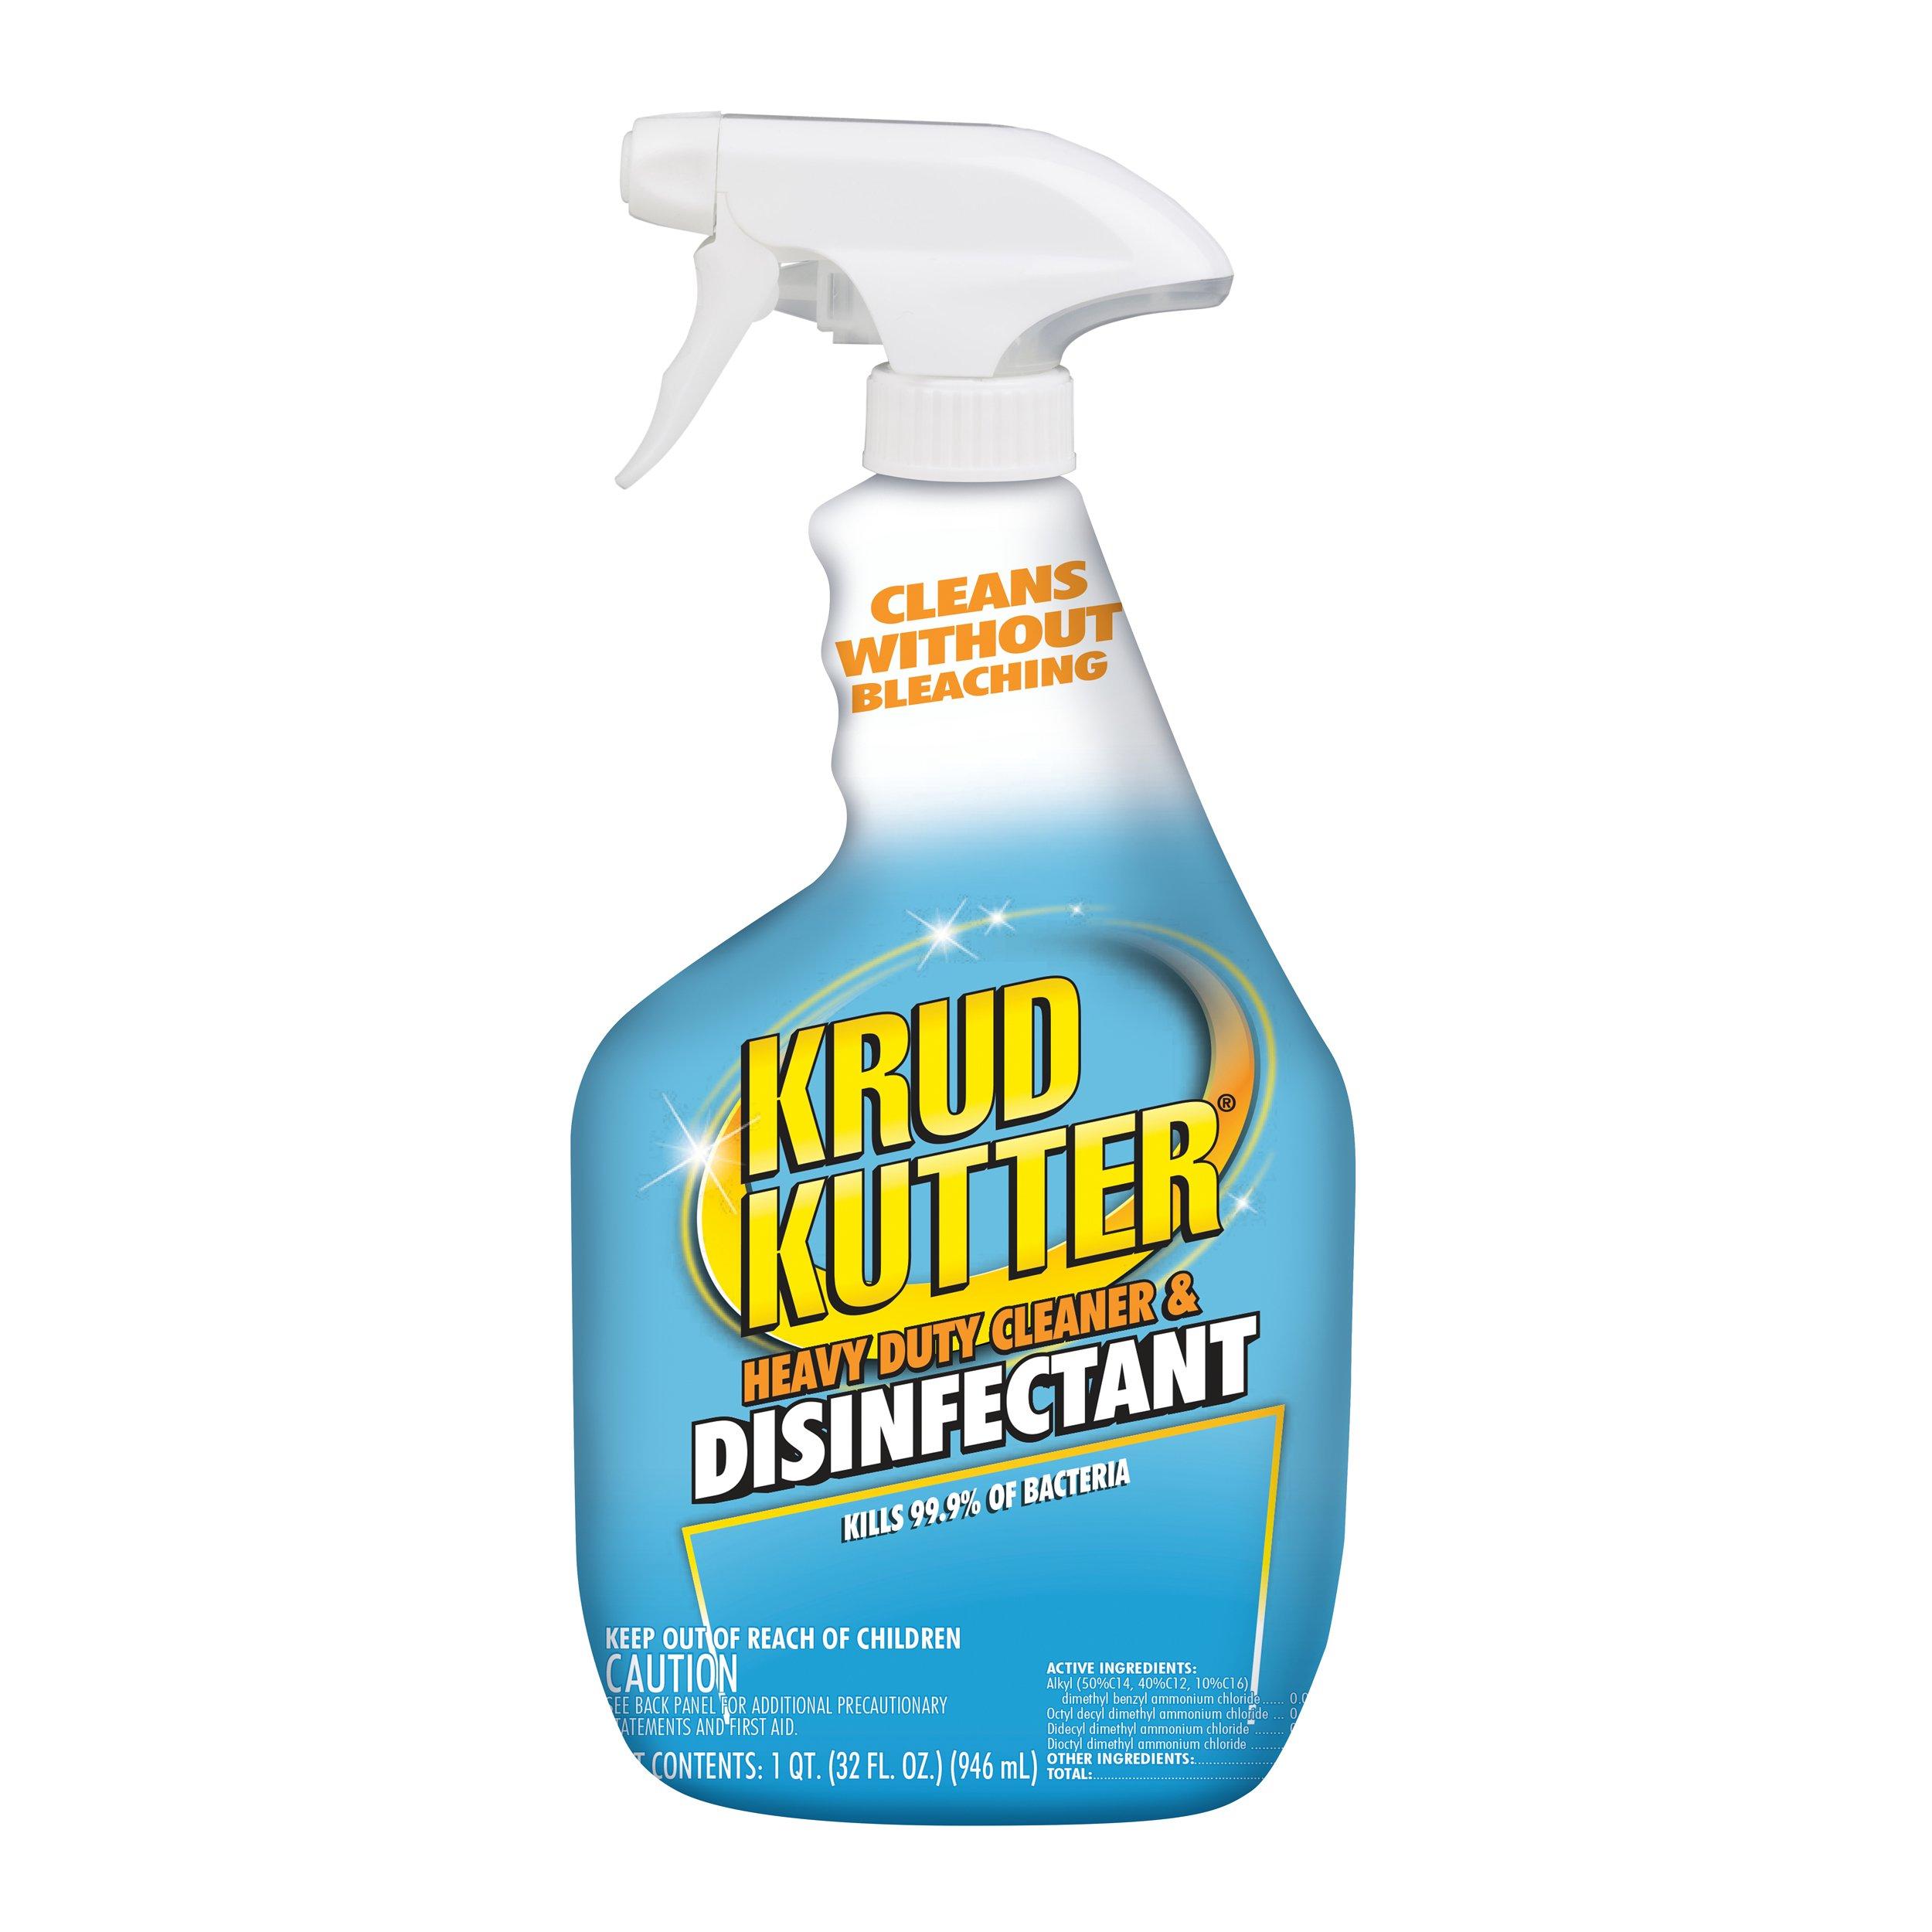 Krud Kutter Heavy Duty Cleaner and Disinfectant 32oz.